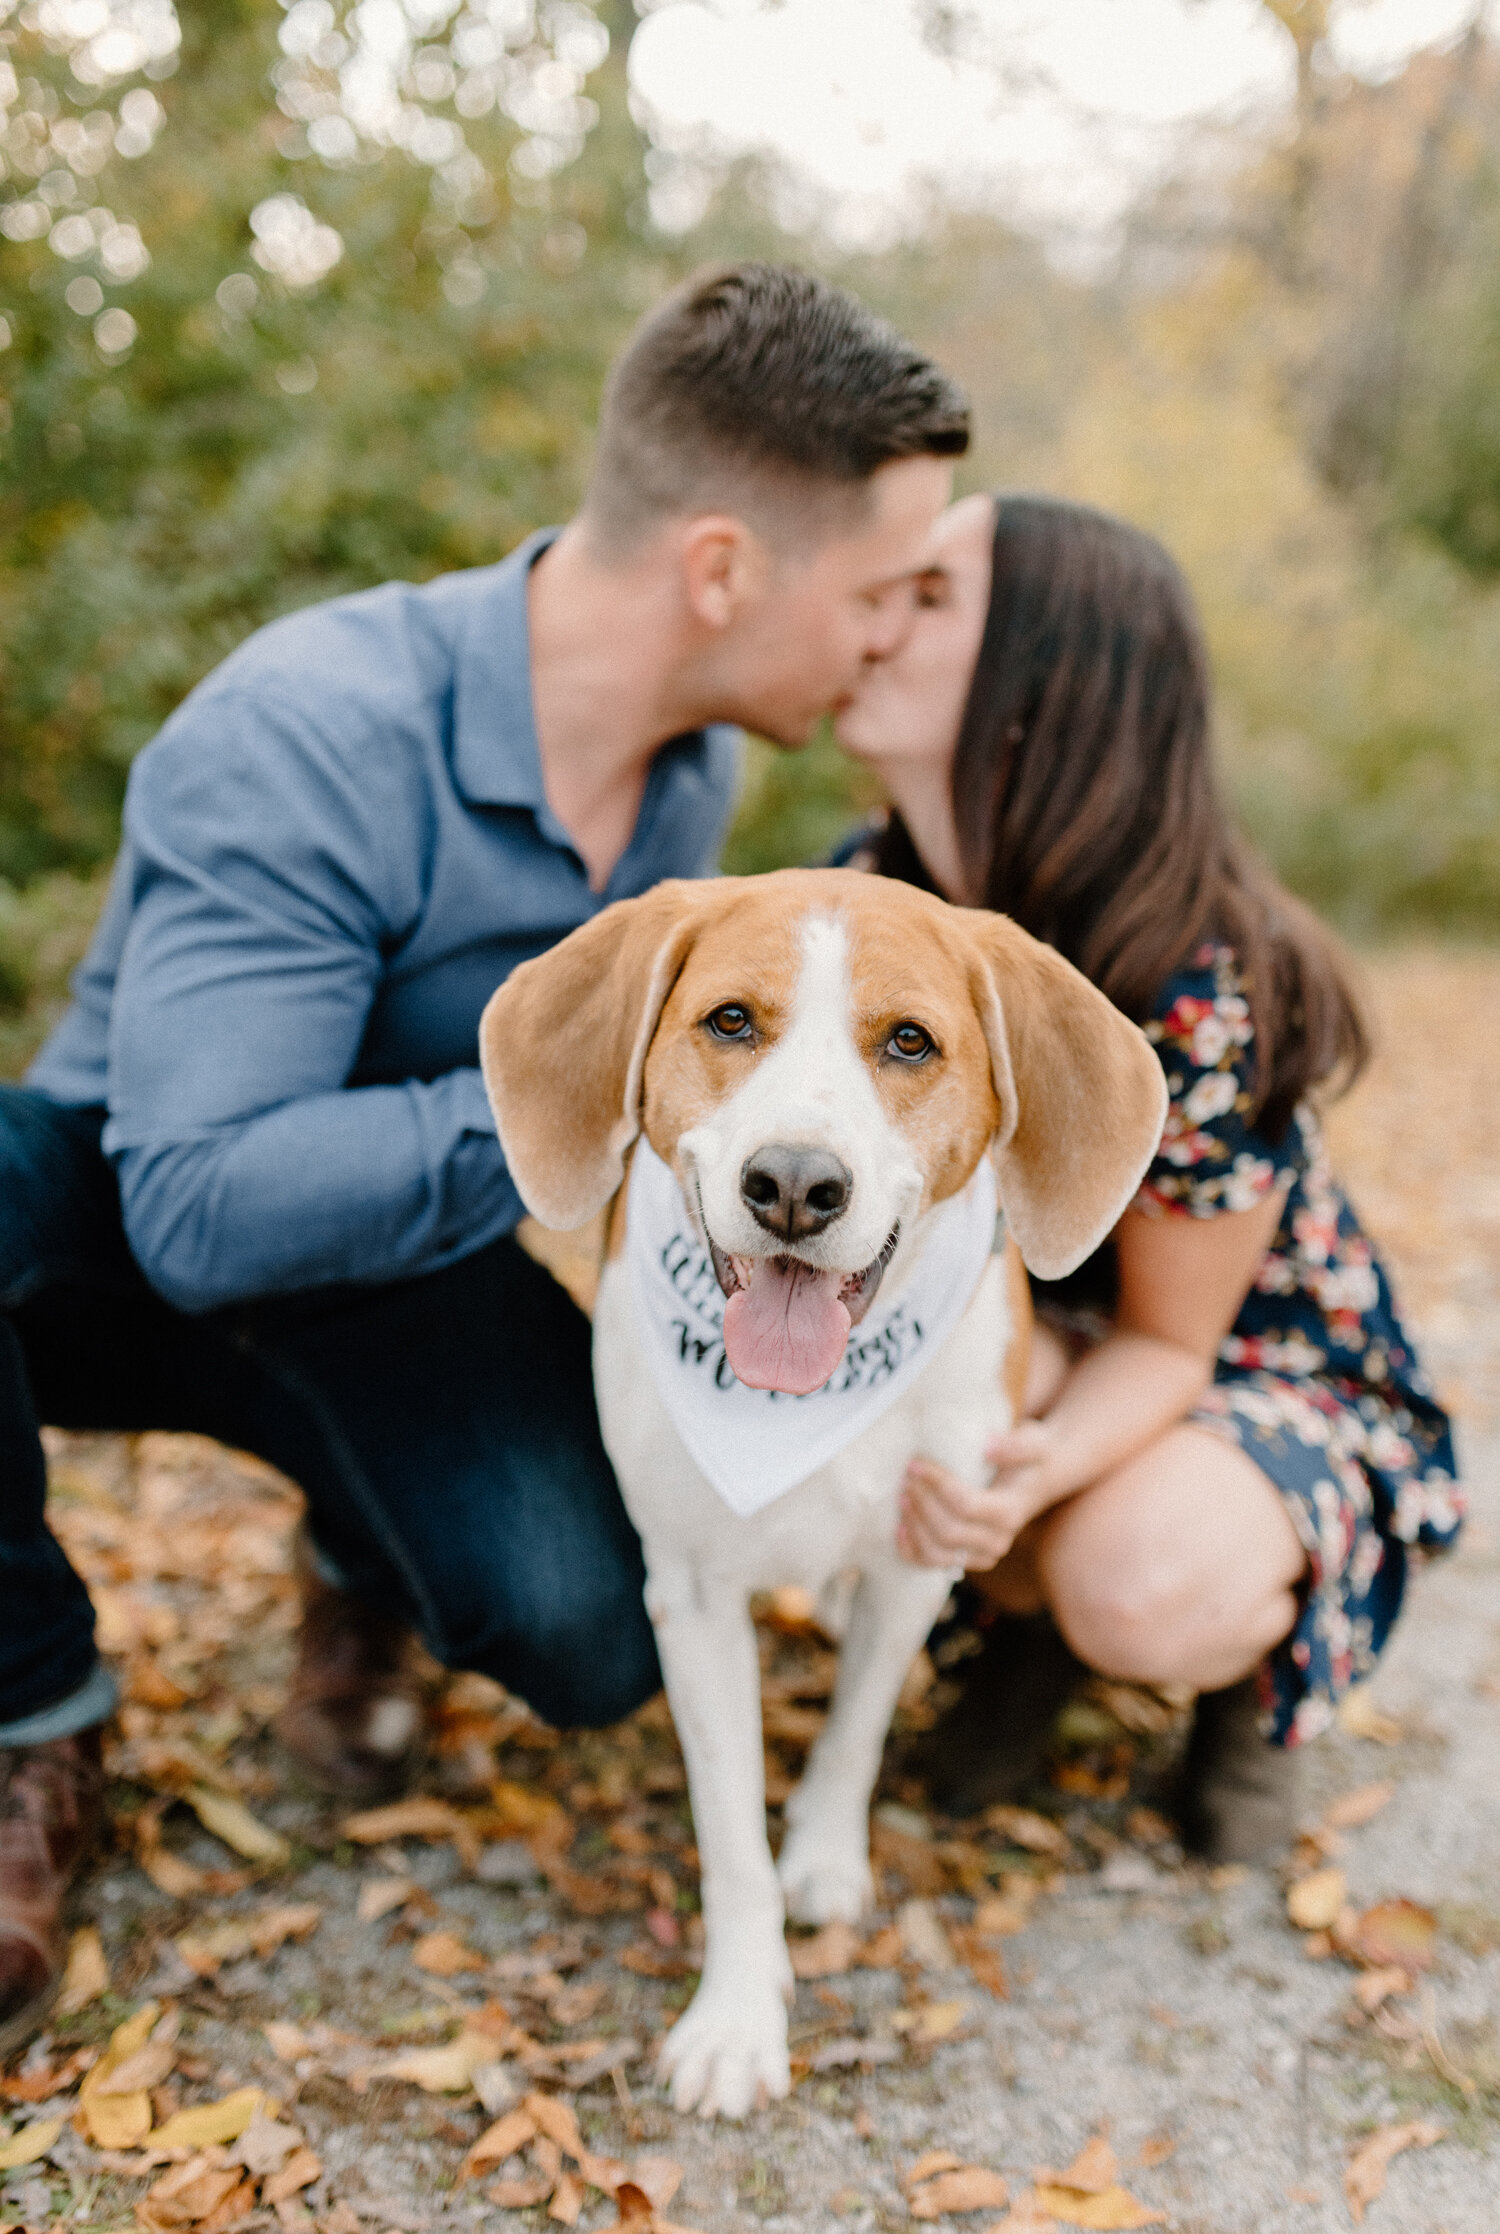   During this autumn engagement photo session in Brockville, Ontario, Chelsea Mason Photography captures an out of focus couple kissing with their family dog in the foreground. fomily dog hound couple kissing engagement shoot autumn photos brockville